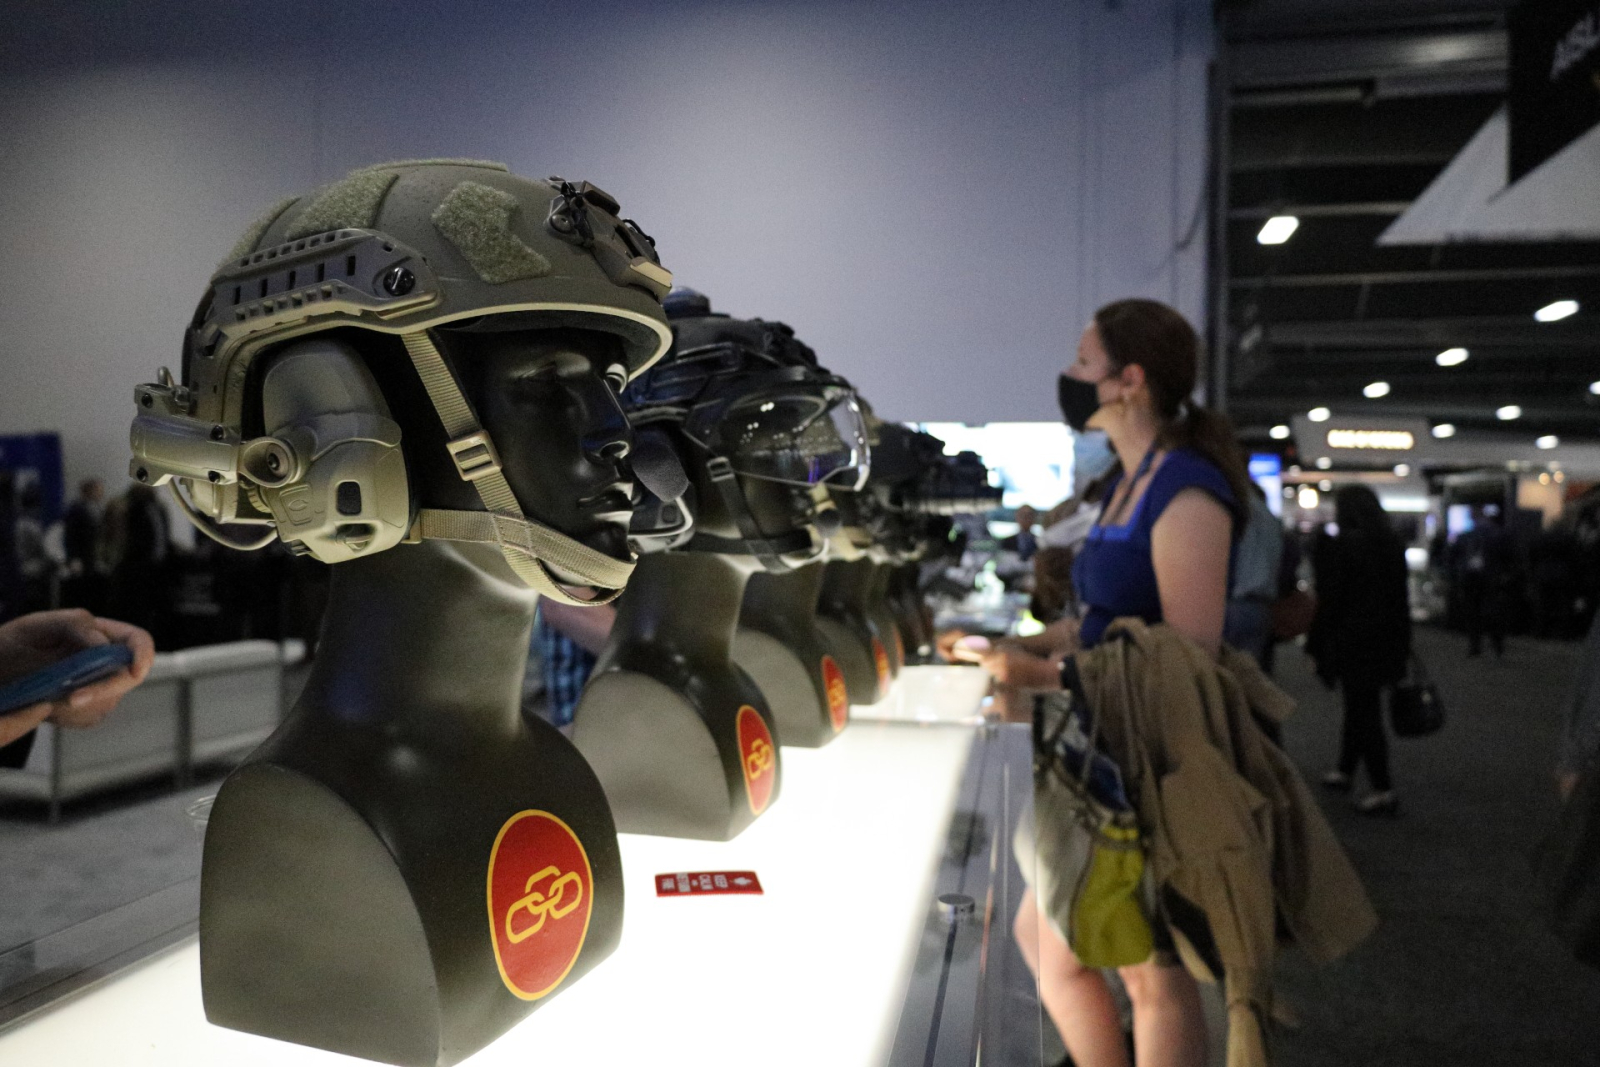 A line of military helmets sit ina  row, with a woman browsing in the background